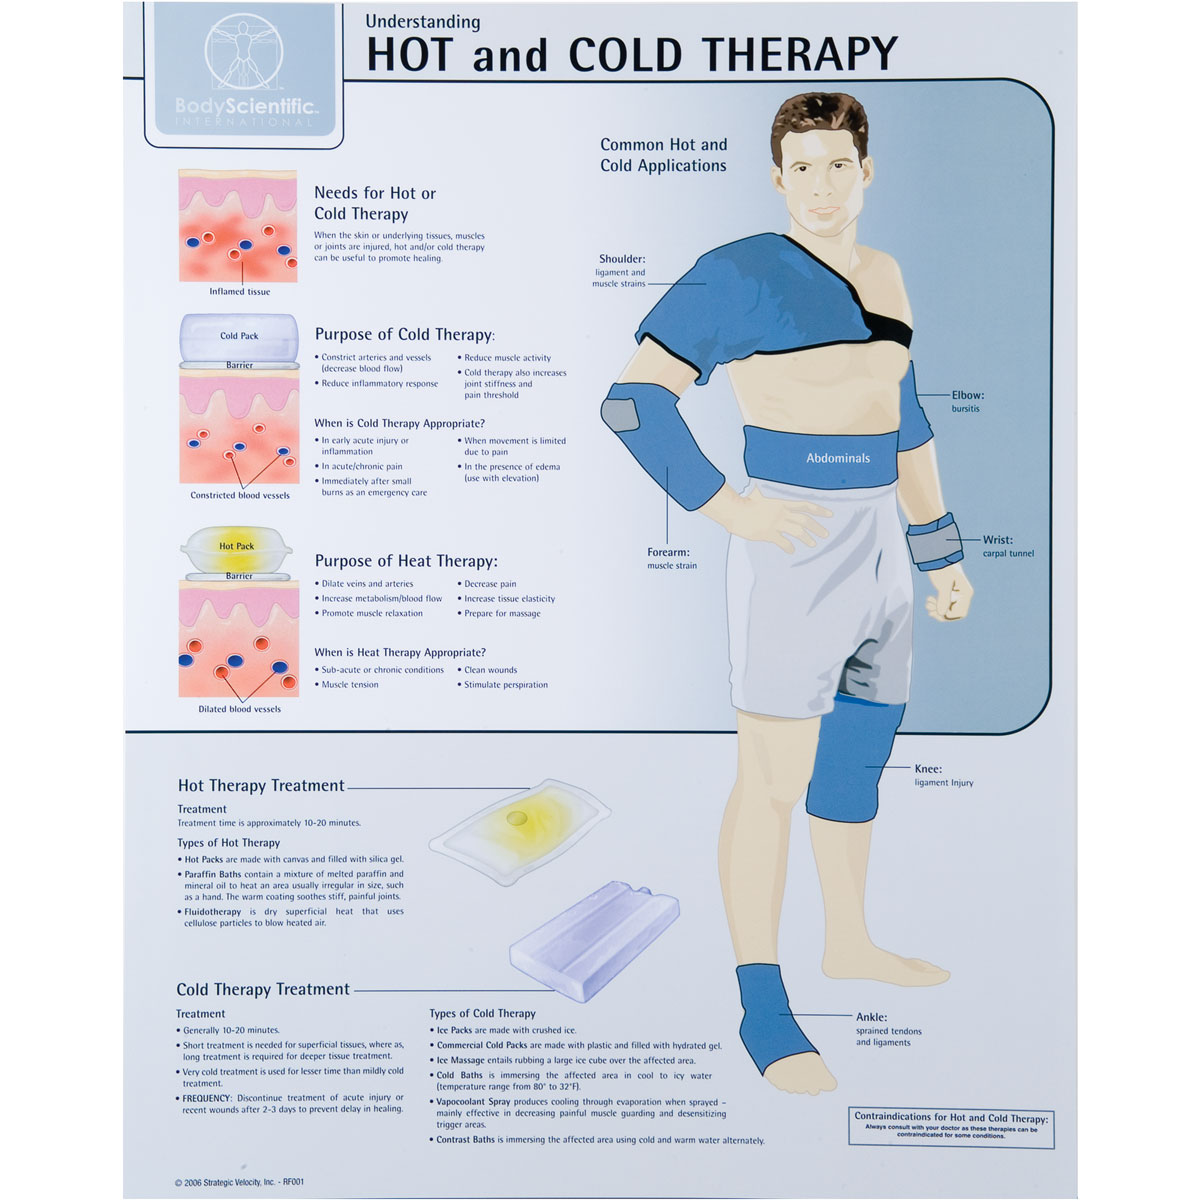 Heat and cold treatment: Which is best?